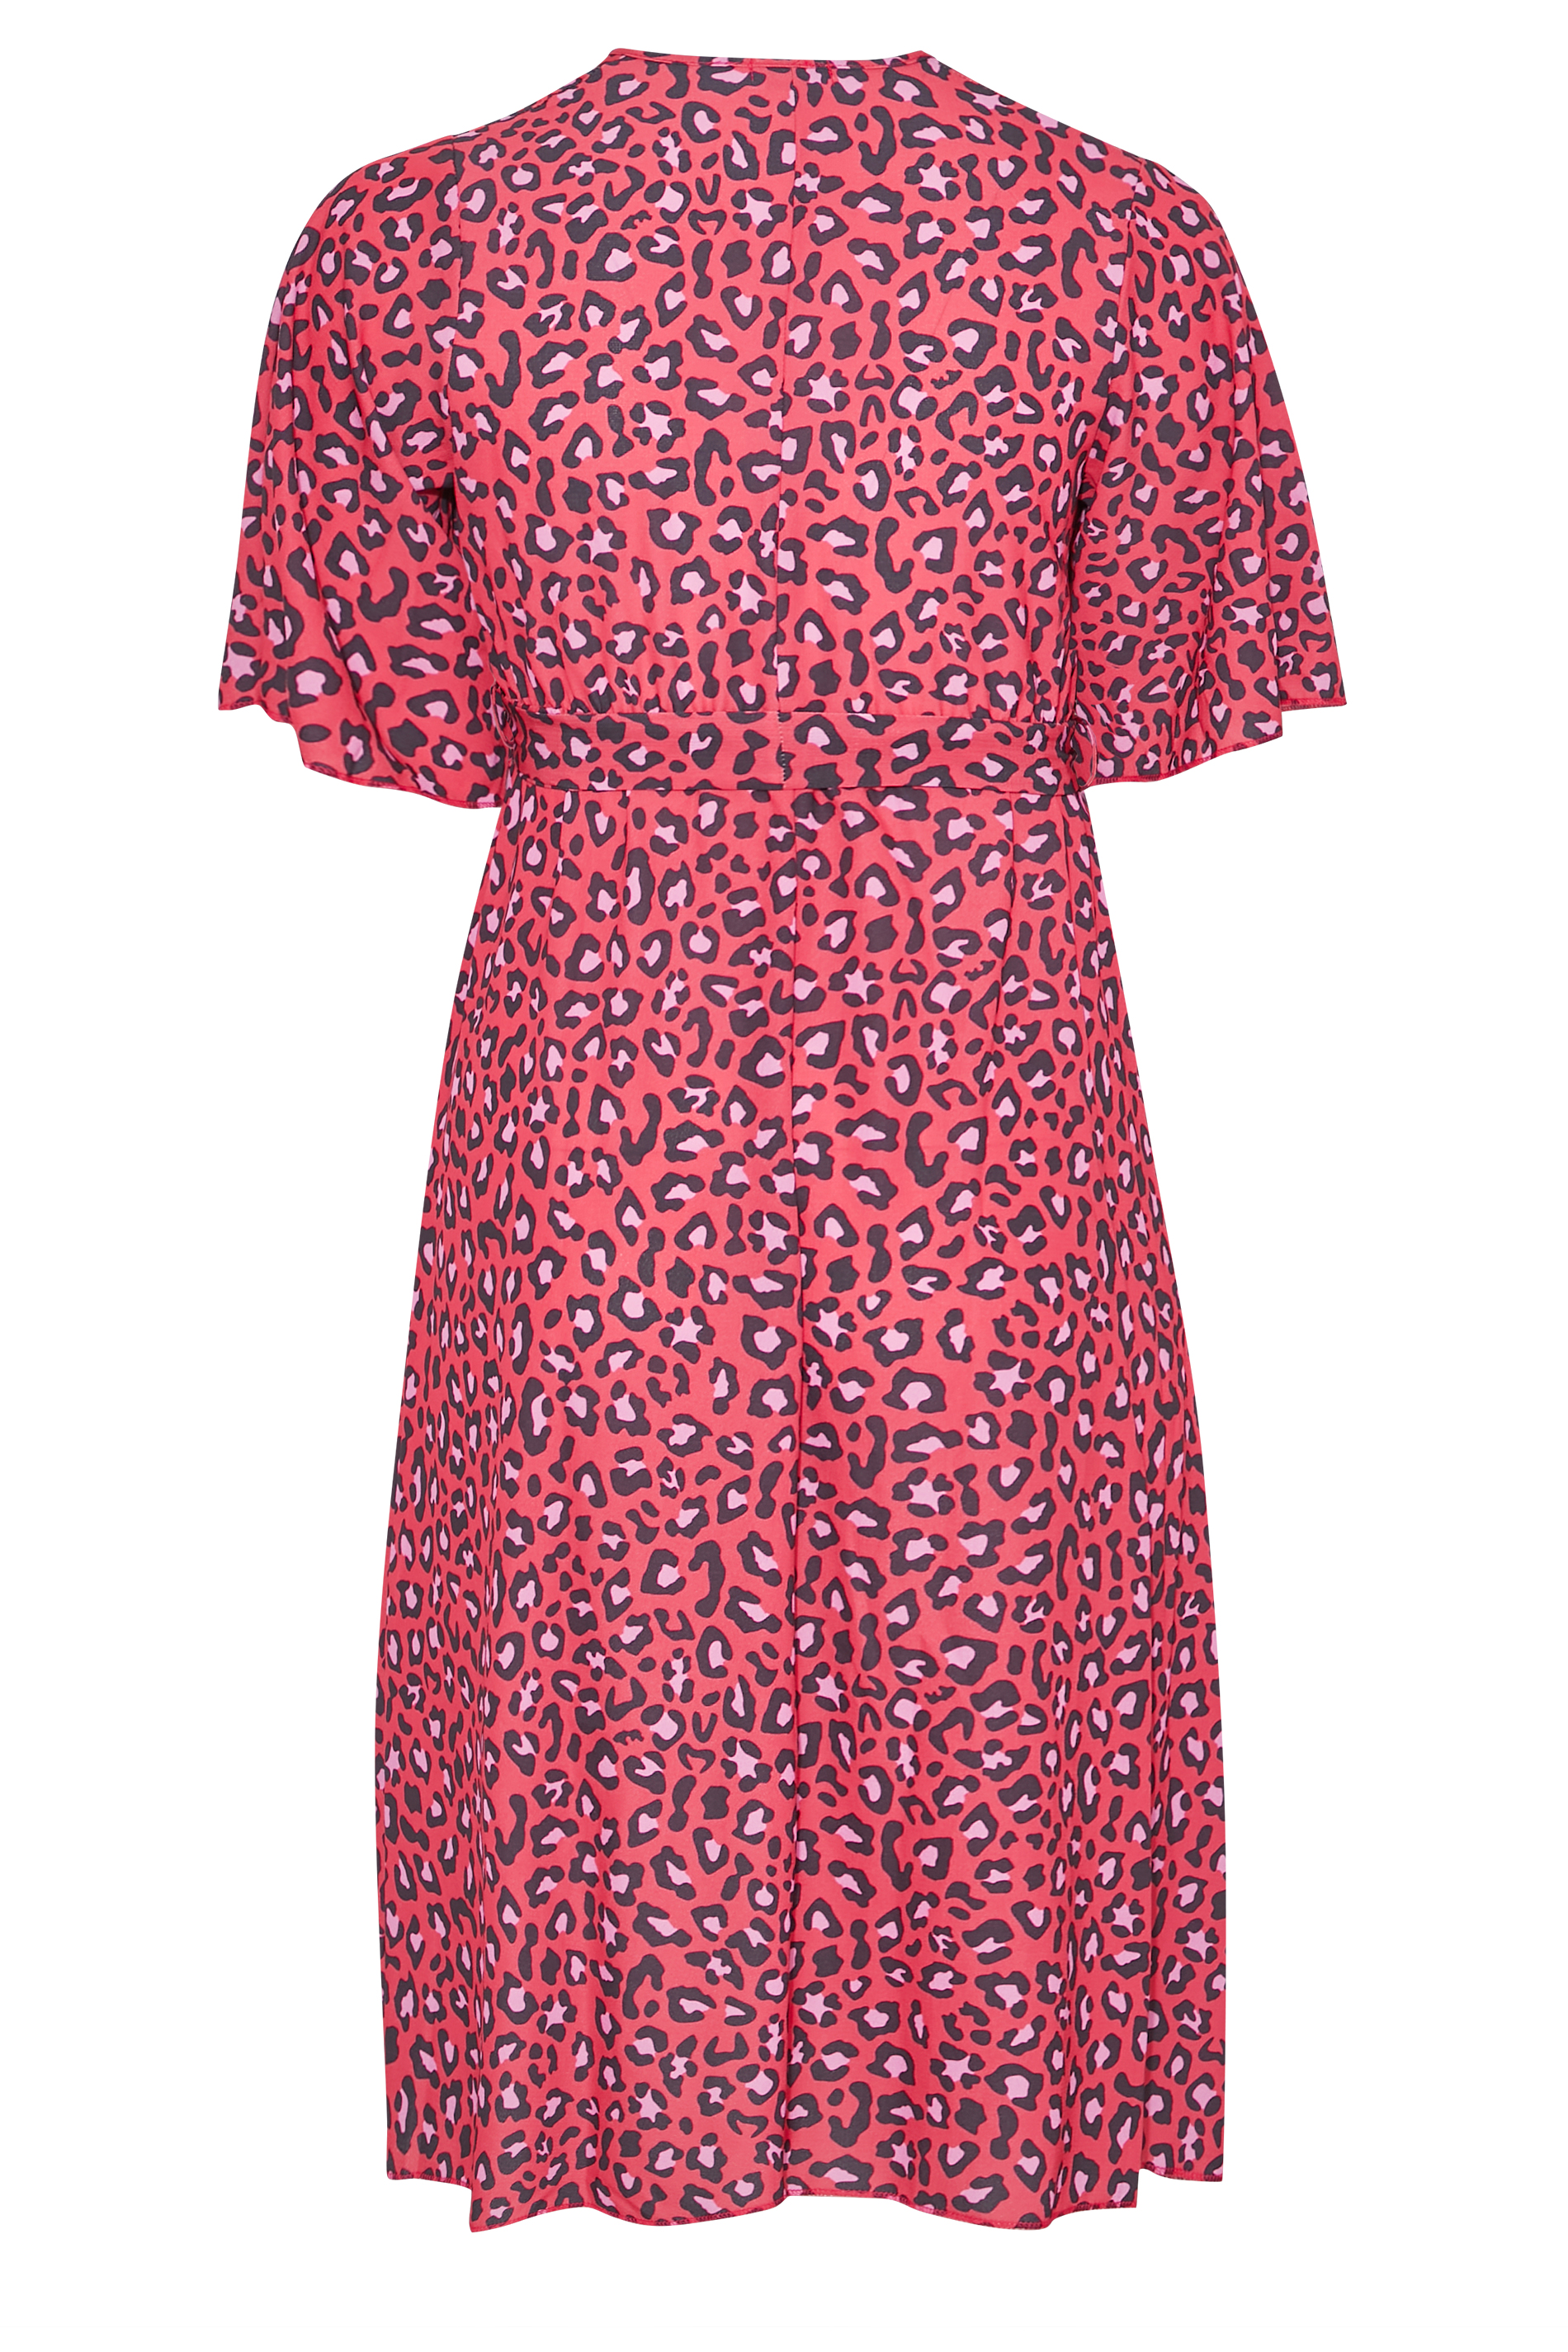 Robes Grande Taille Grande taille  Robes Portefeuilles | YOURS LONDON - Robe Rouge Cache-Coeur Léopard - OI39322